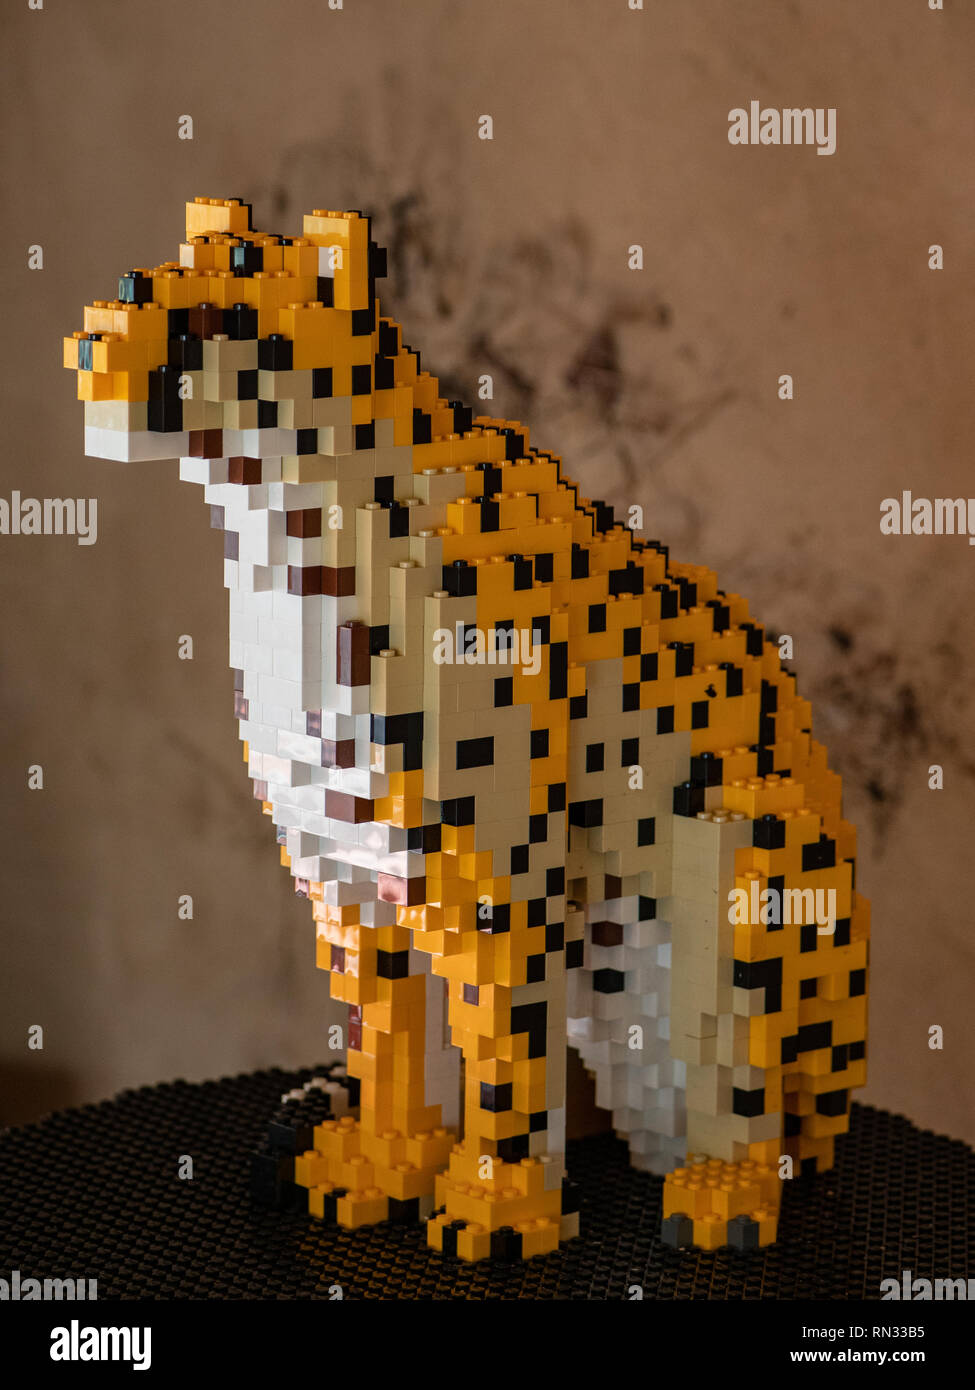 Cheetah model, part of the Lego Brick Trail at Chester Zoo Stock Photo